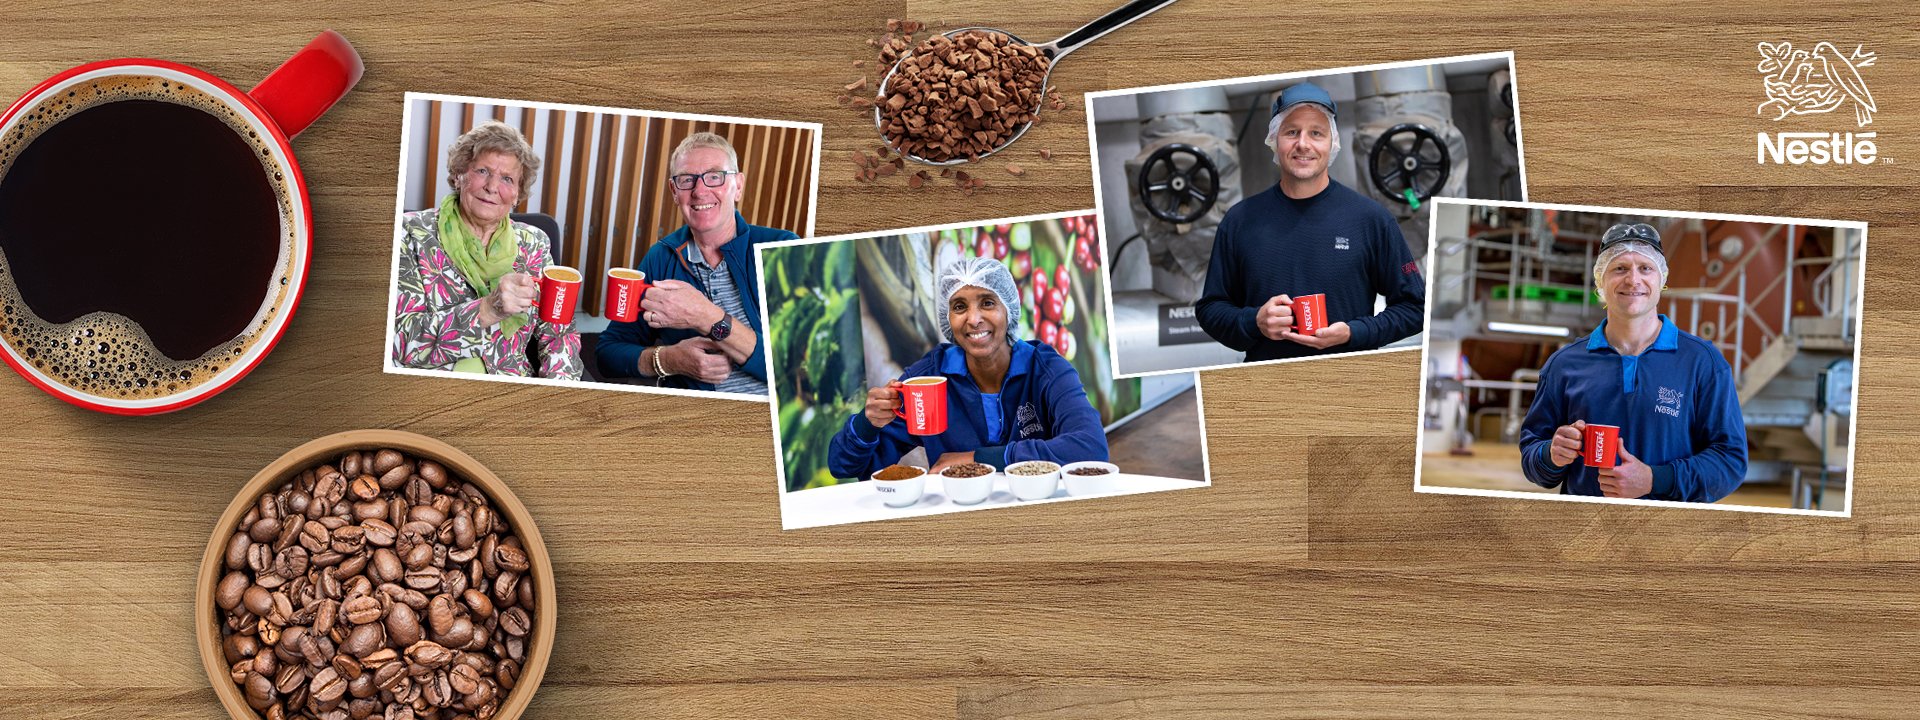 Photos on a desk featuring Nescafé staff next to a cup of coffee